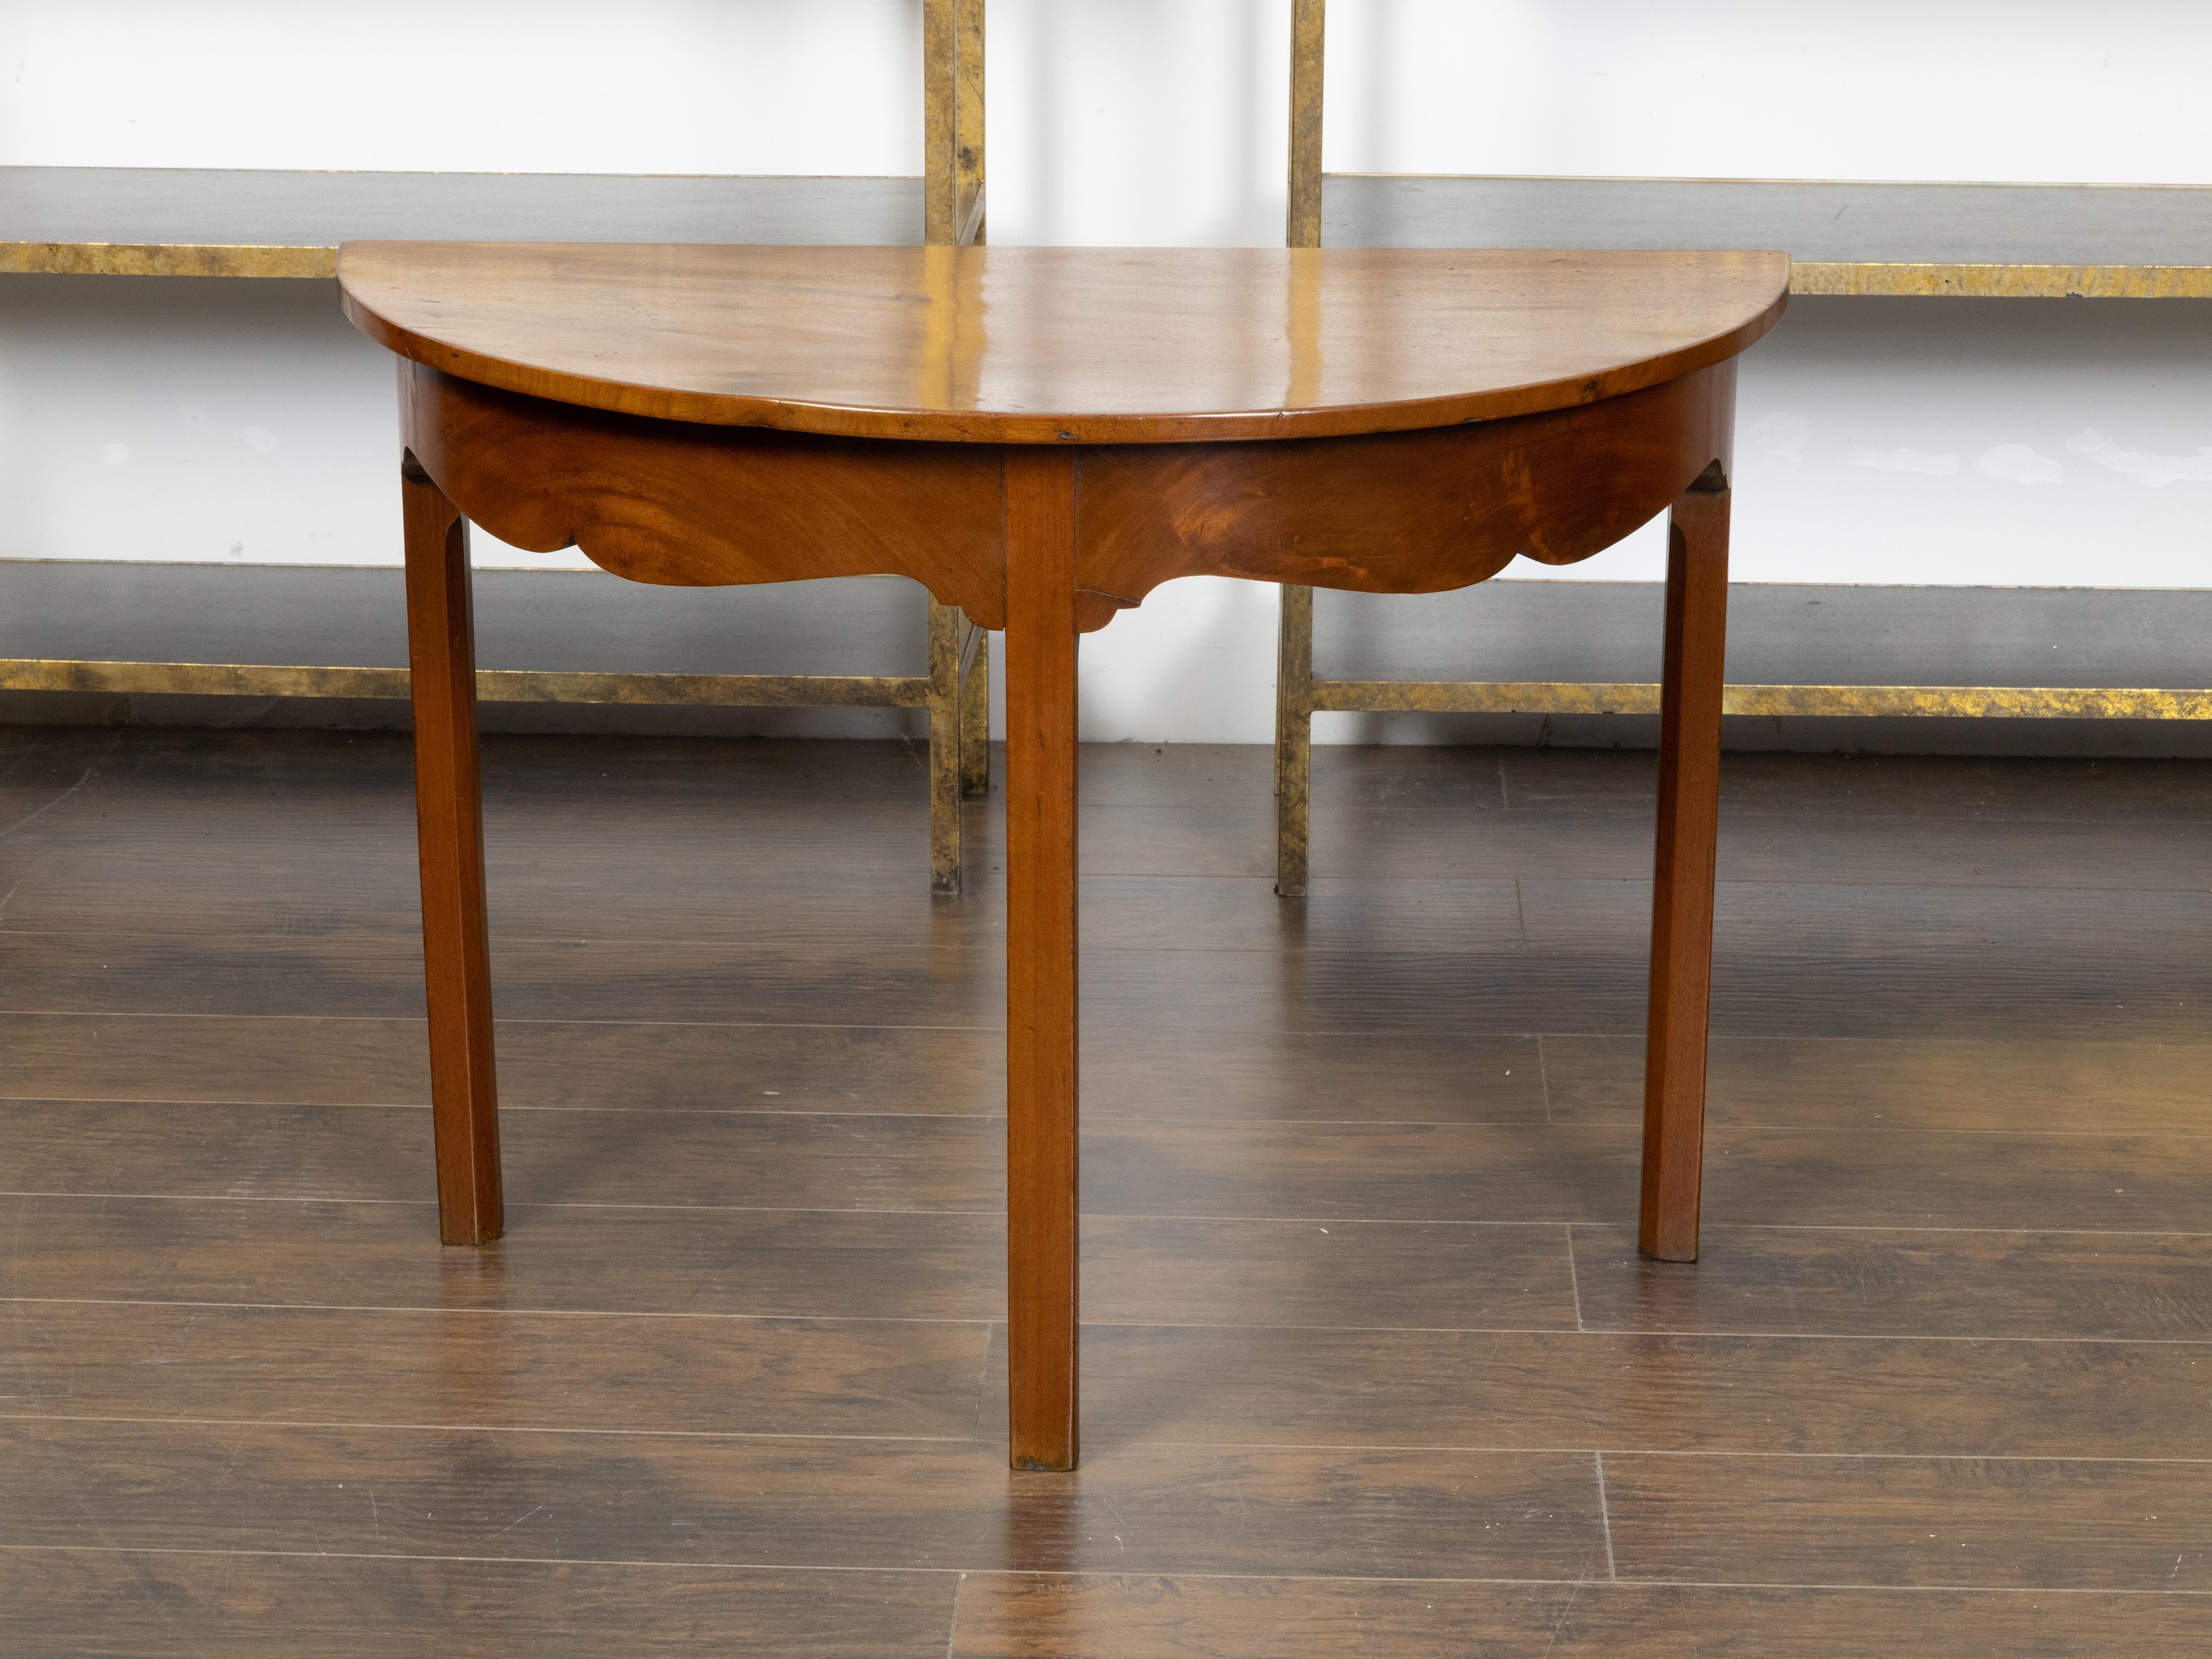 An English mahogany demi-lune side table from the 19th century, with semi-circular top, carved apron and straight legs. Created in England during the 19th century, this mahogany demi-lune side table features a semi-circular veneered top sitting